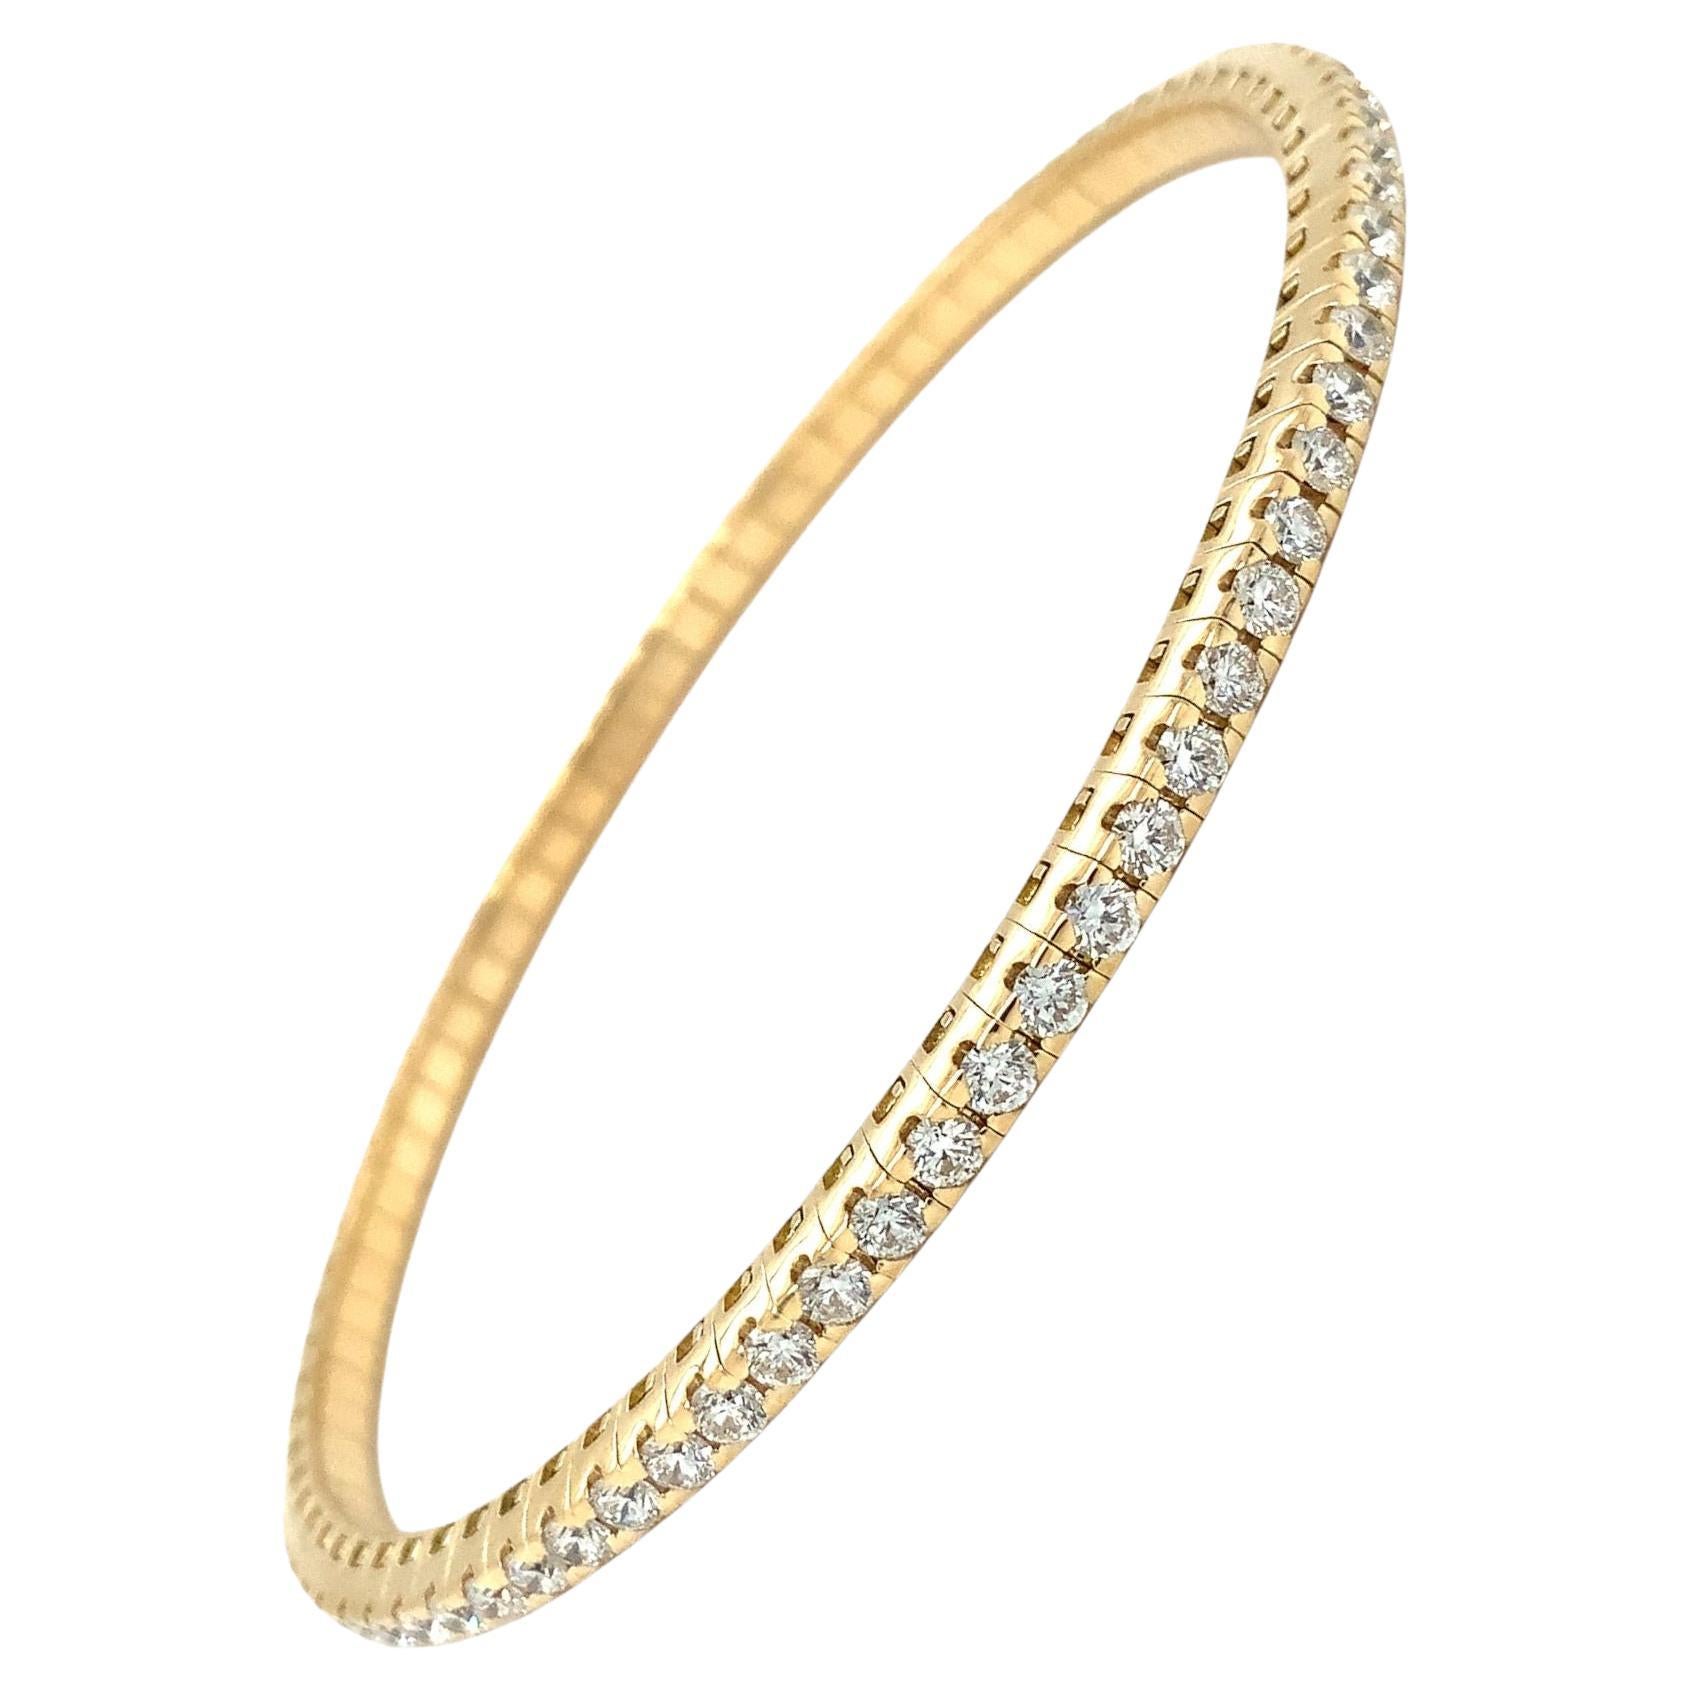 A Link Collection Classic Stretchy Diamond Bracelet 2.61ct Set in 18k Gold